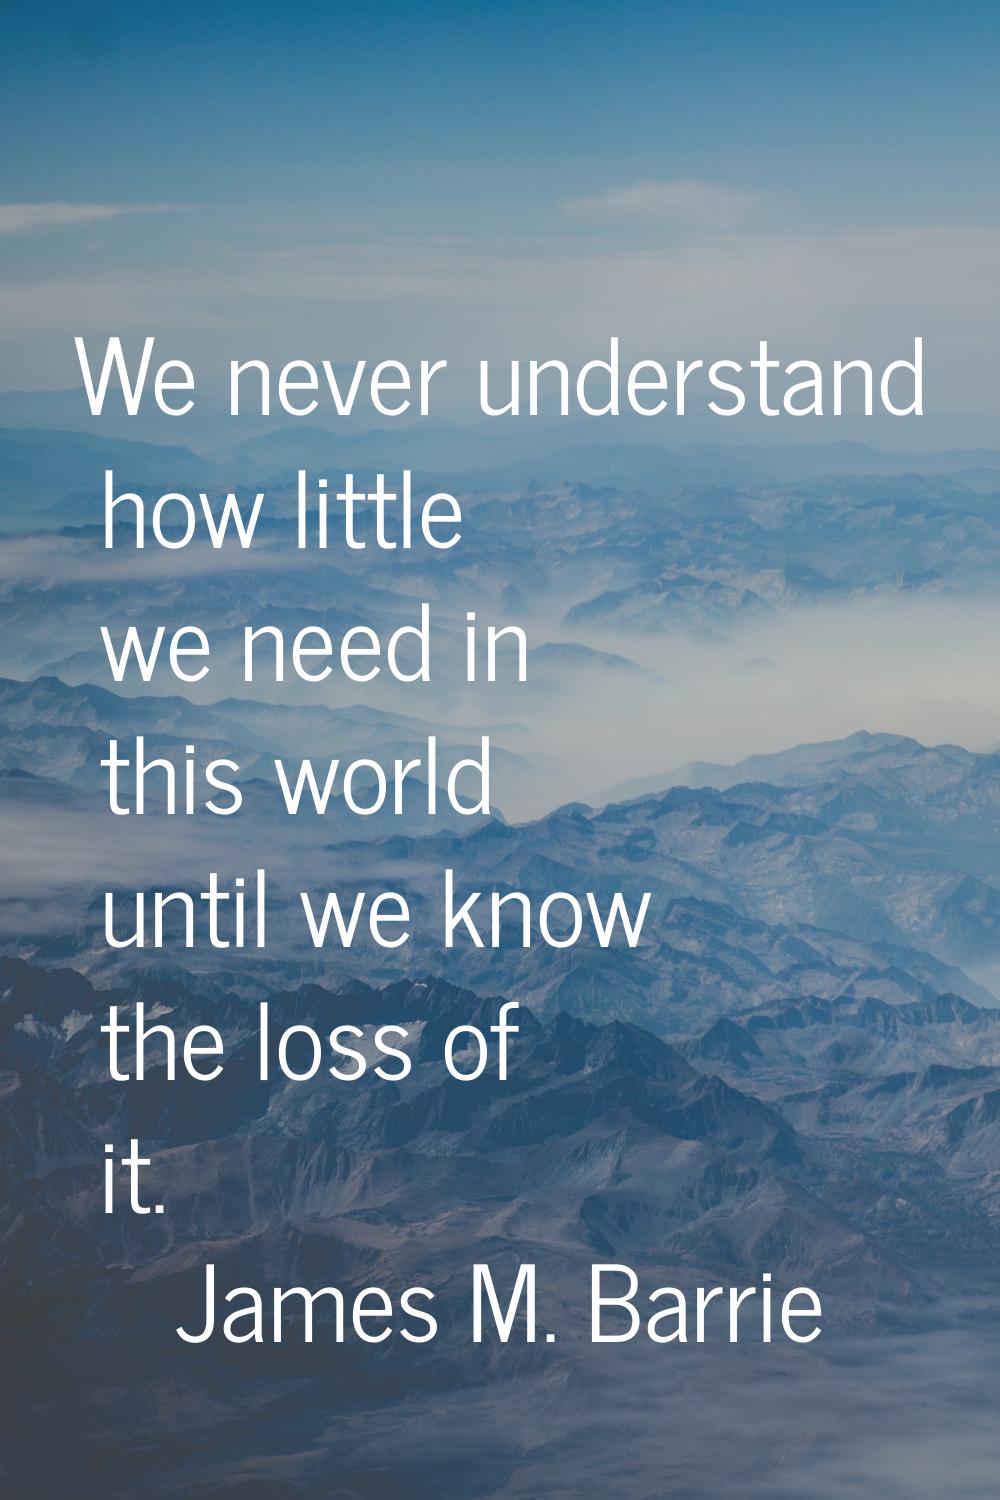 We never understand how little we need in this world until we know the loss of it.